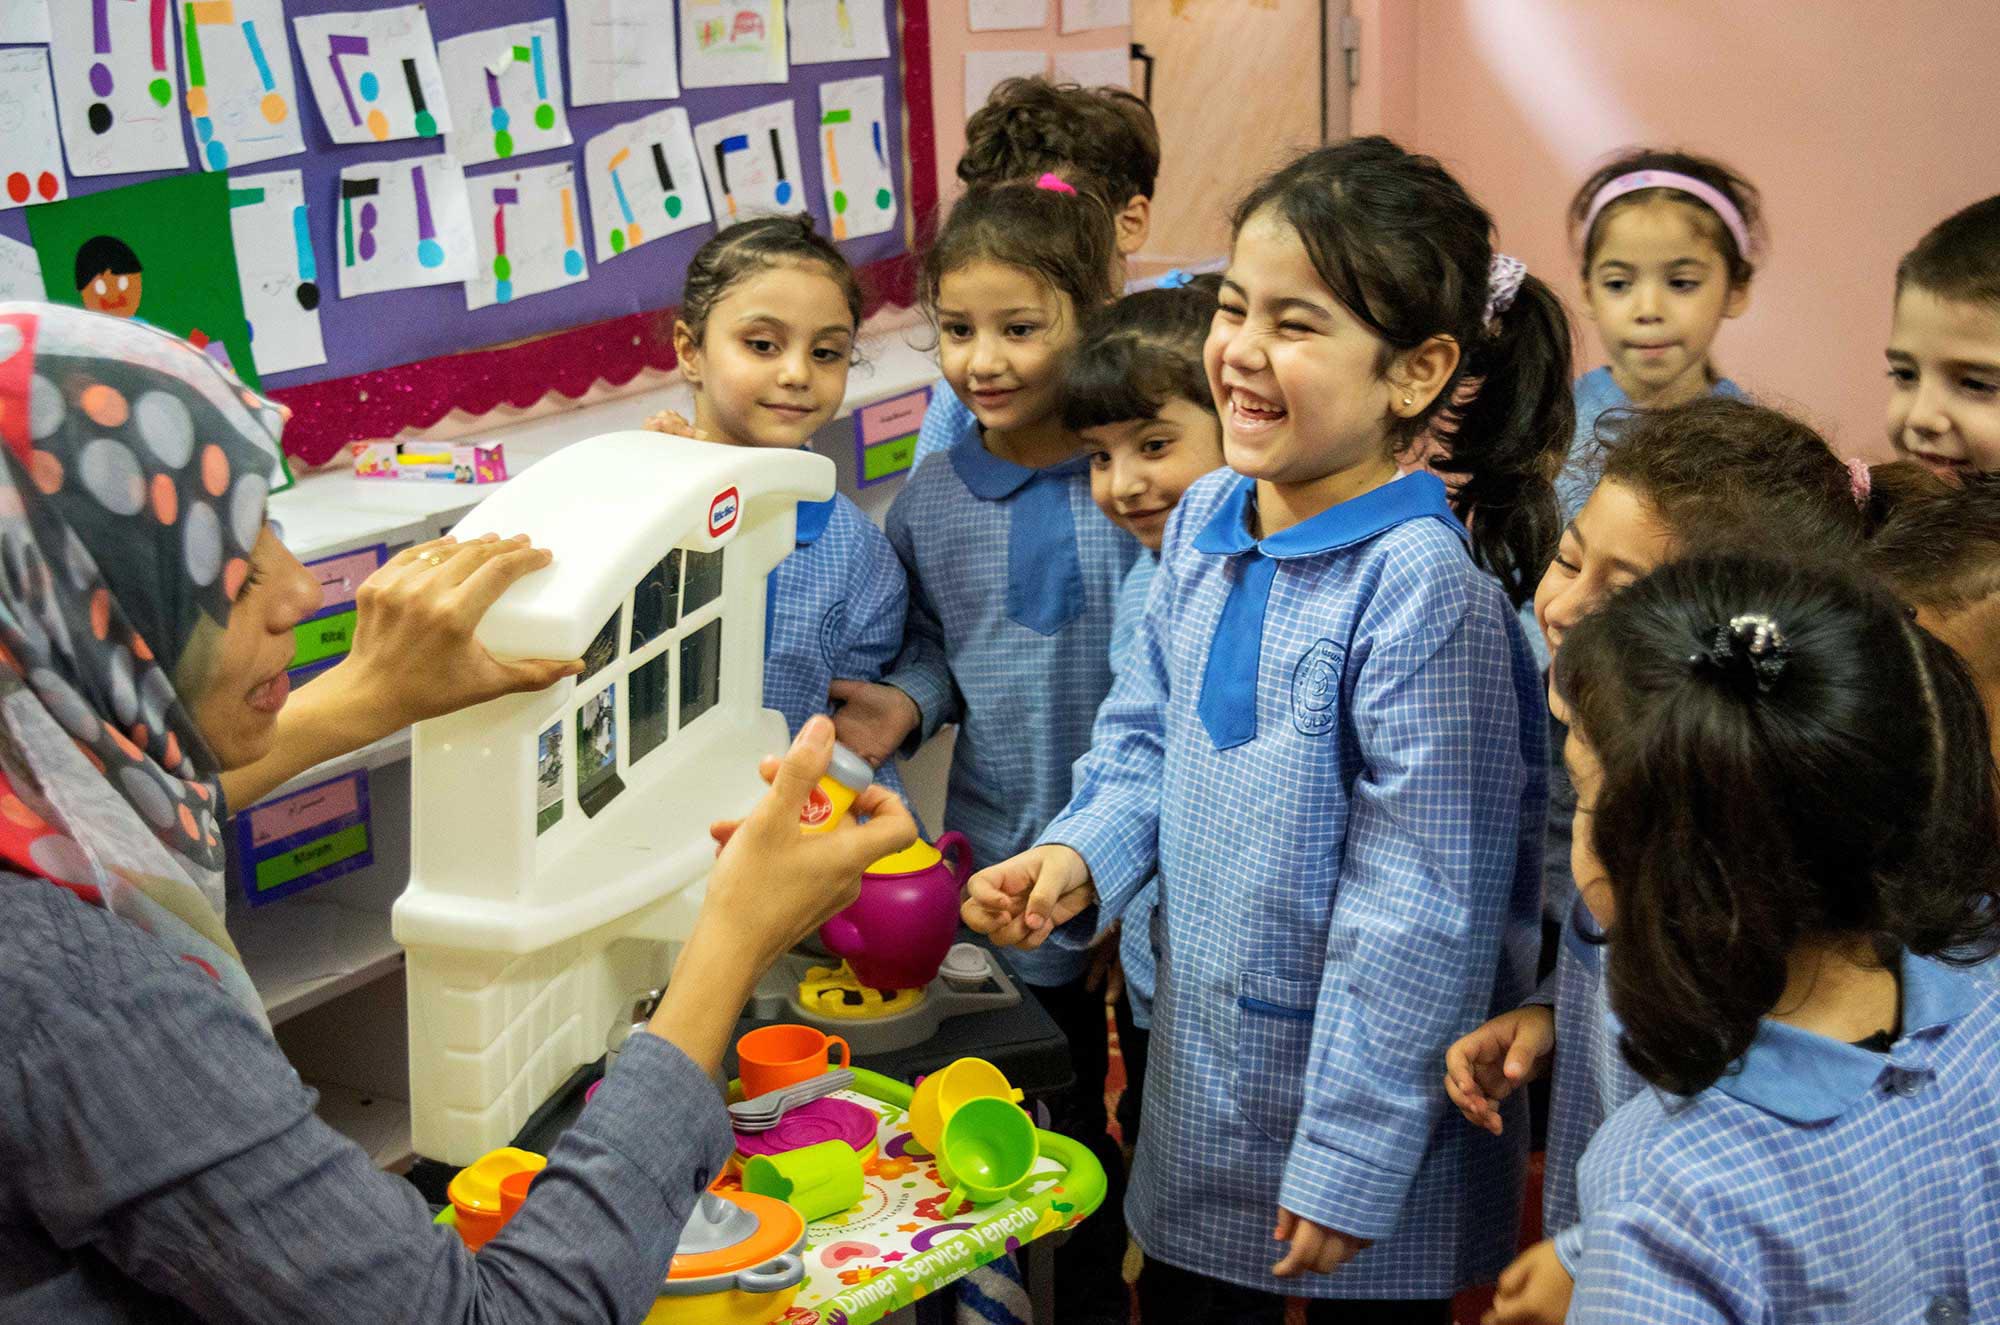 Students at the Anera-renovated preschool in Burj El Barajneh interact with their teacher while playing with the news toys Anera provided.